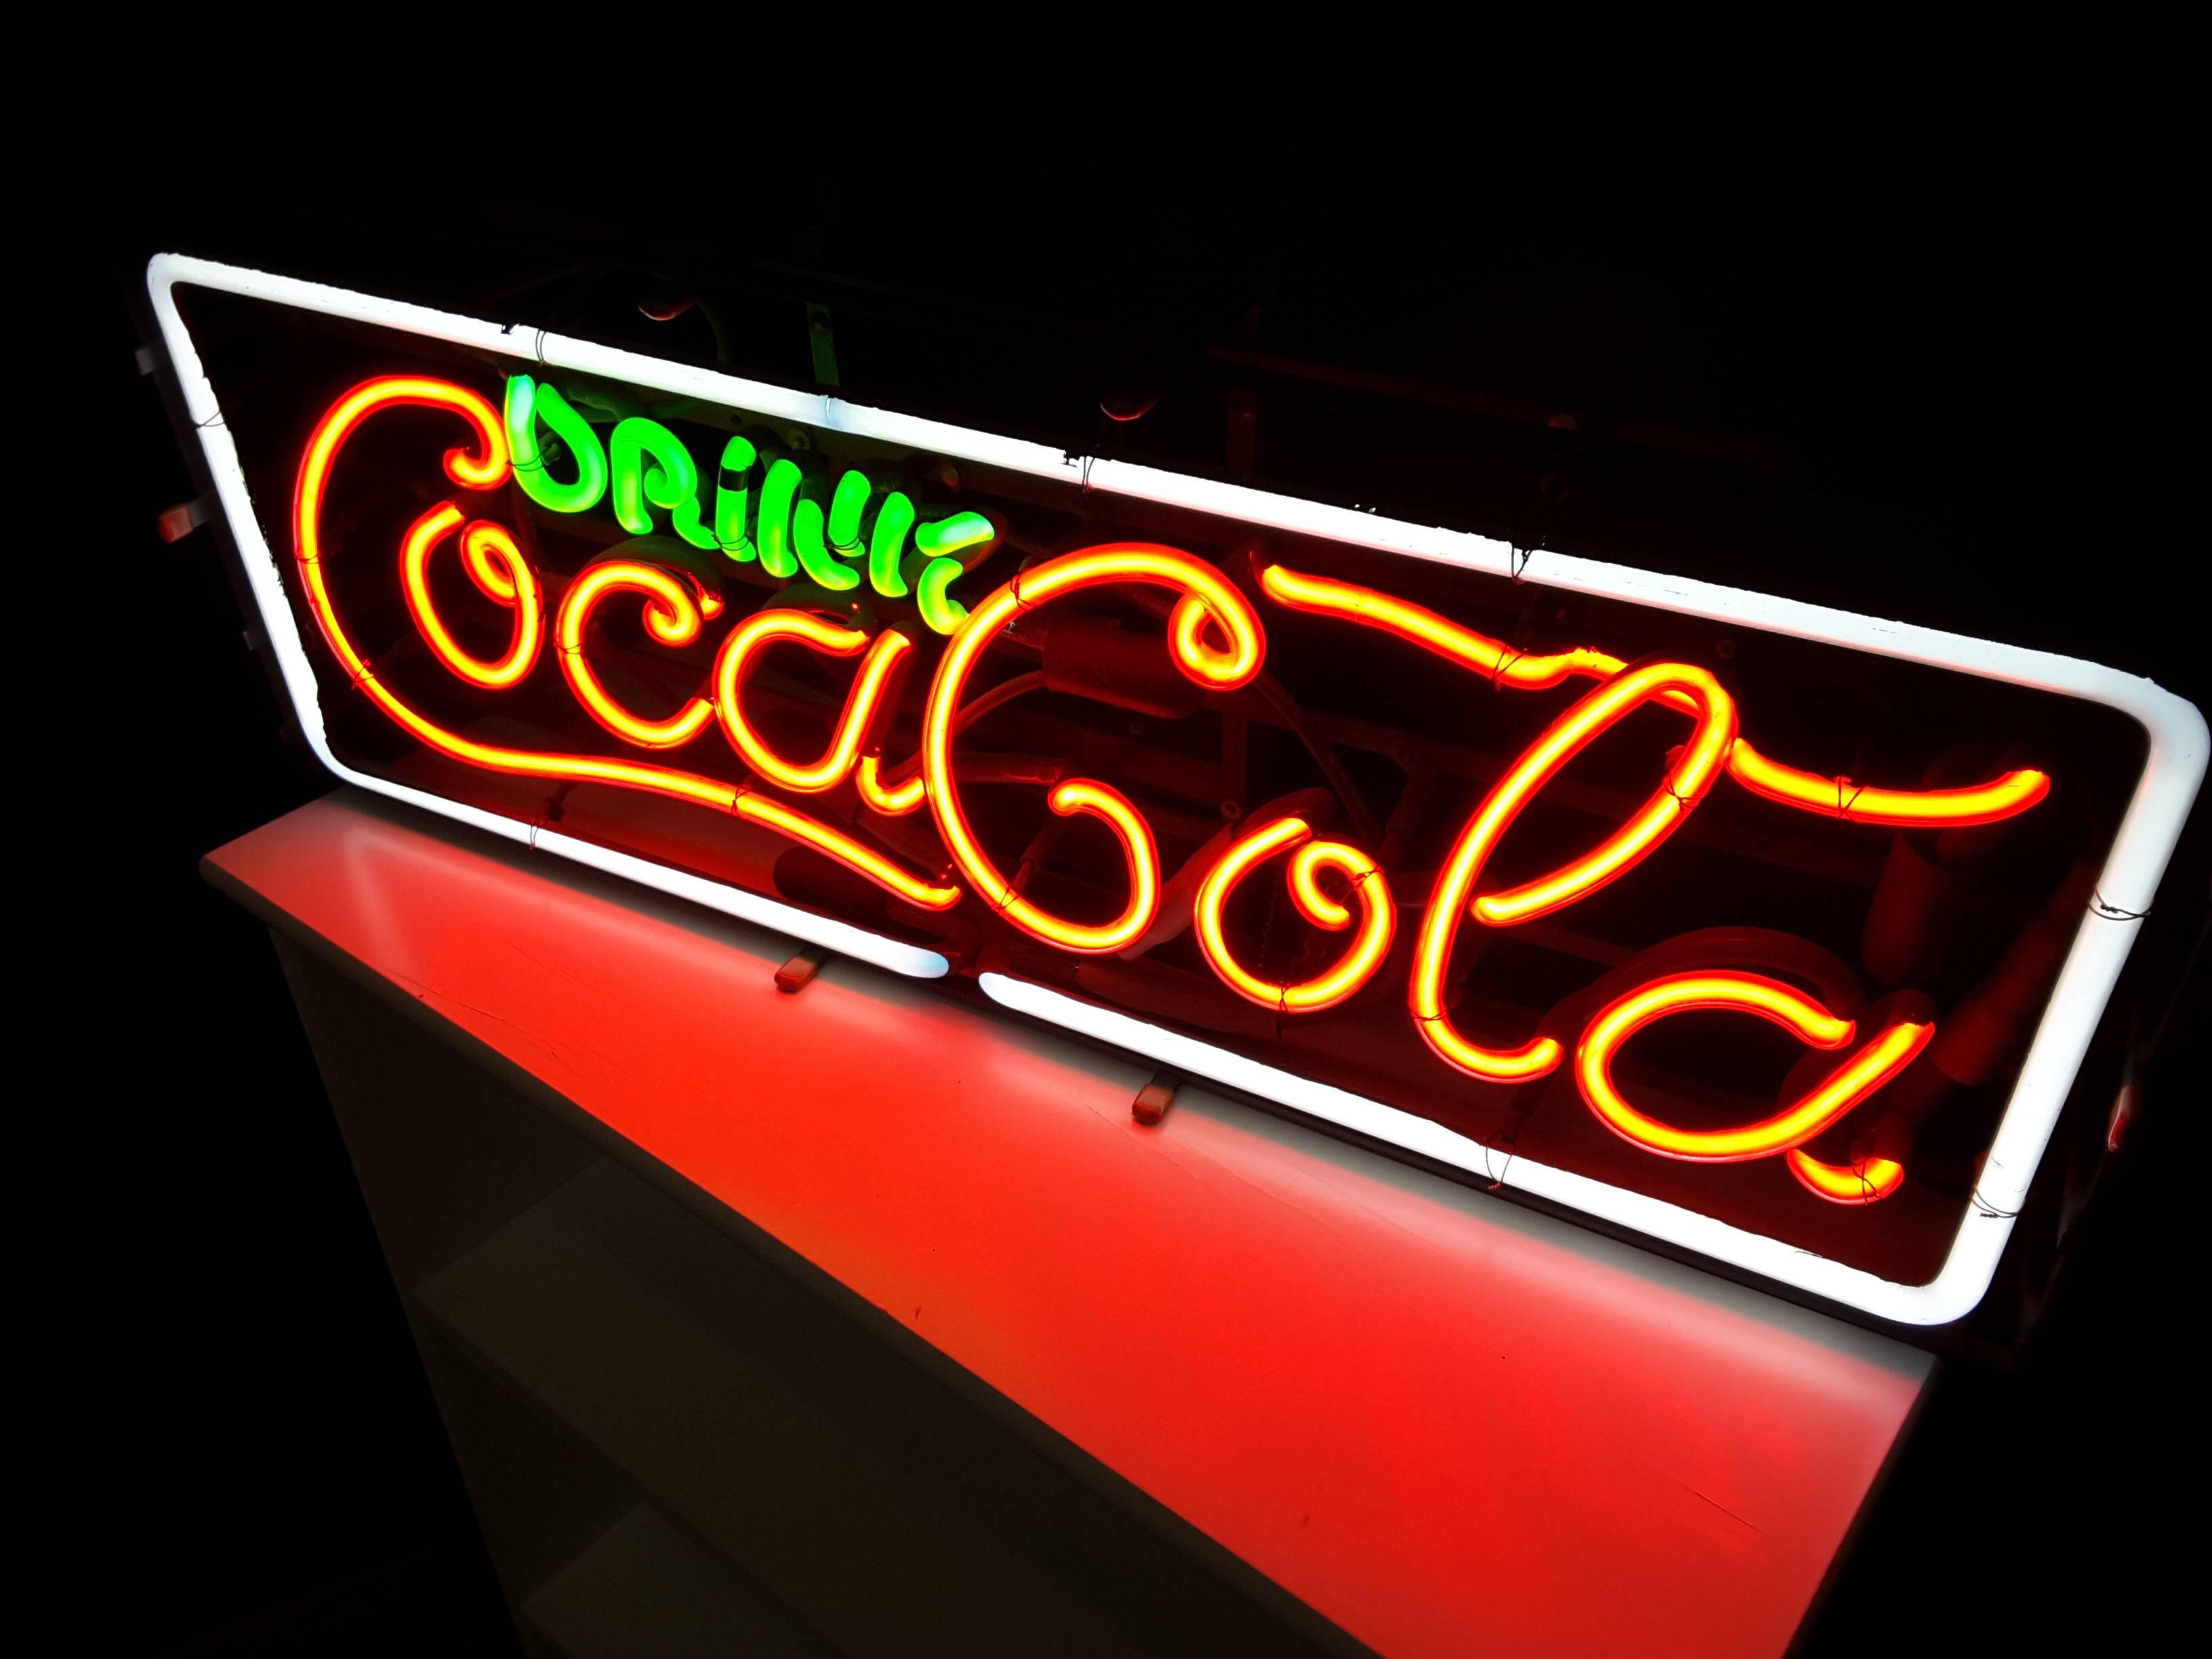 A great Drink Coca Cola 1960's three color neon sign, done in white, red and green Neon. The neon sign has been professionally restored, new ballast, and recharged neon gas. The sign has original front rubber bumper mounts, frame and tubes. The neon